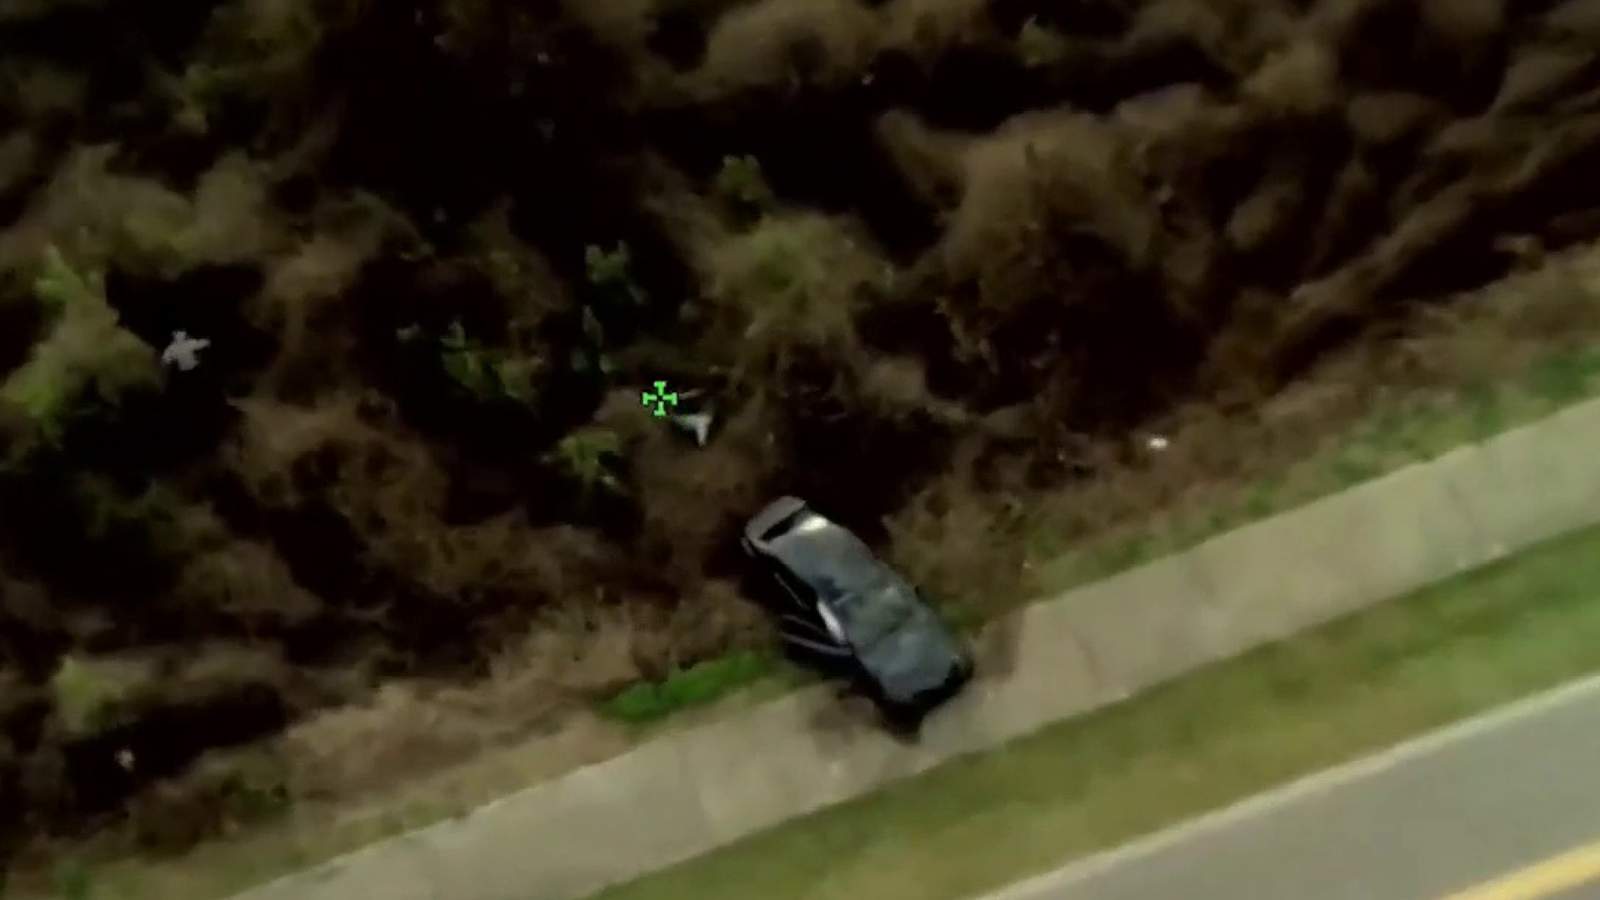 VIDEO: I-4 shooting suspects arrested after fleeing attempt ends in rollover crash